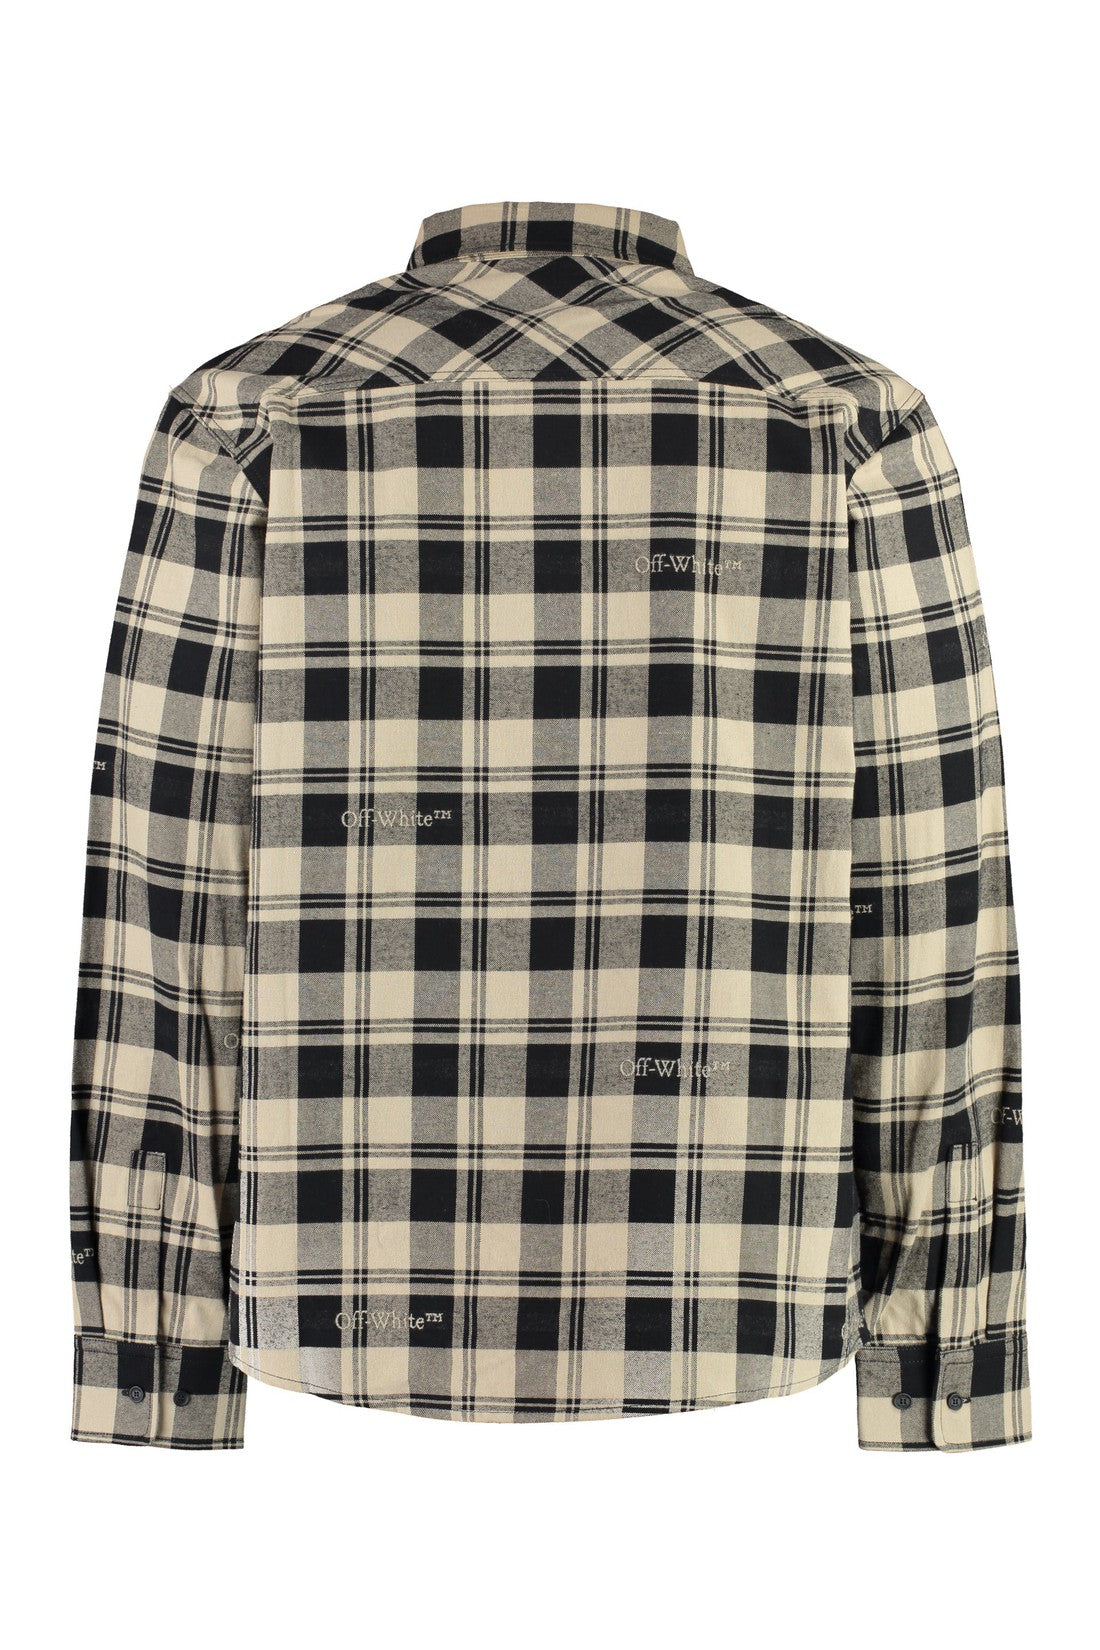 Off-White-OUTLET-SALE-Checked flannel shirt-ARCHIVIST